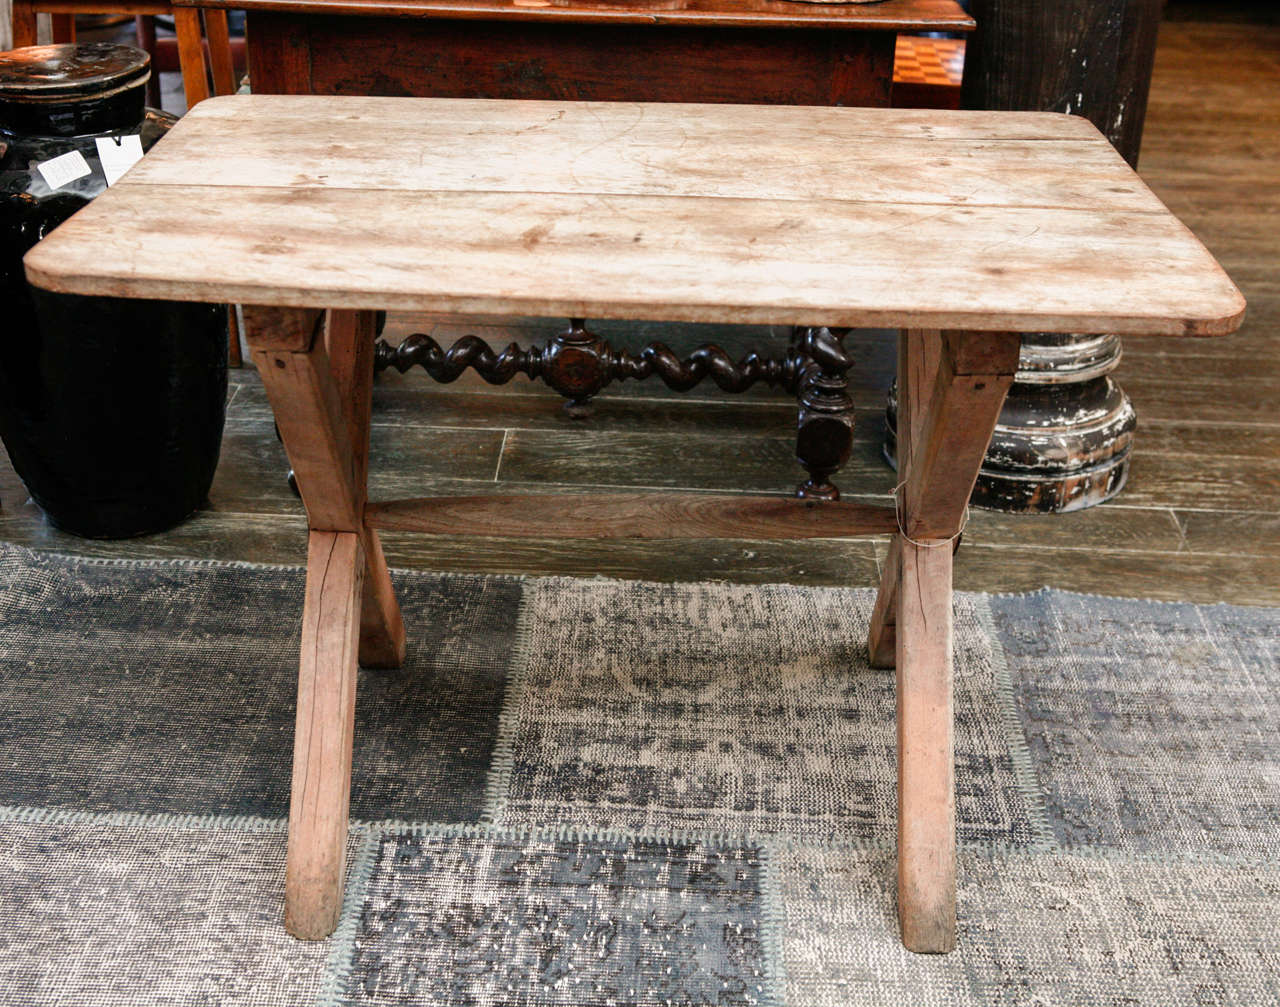 A bleached wood table with x-legs joined by a center stretcher